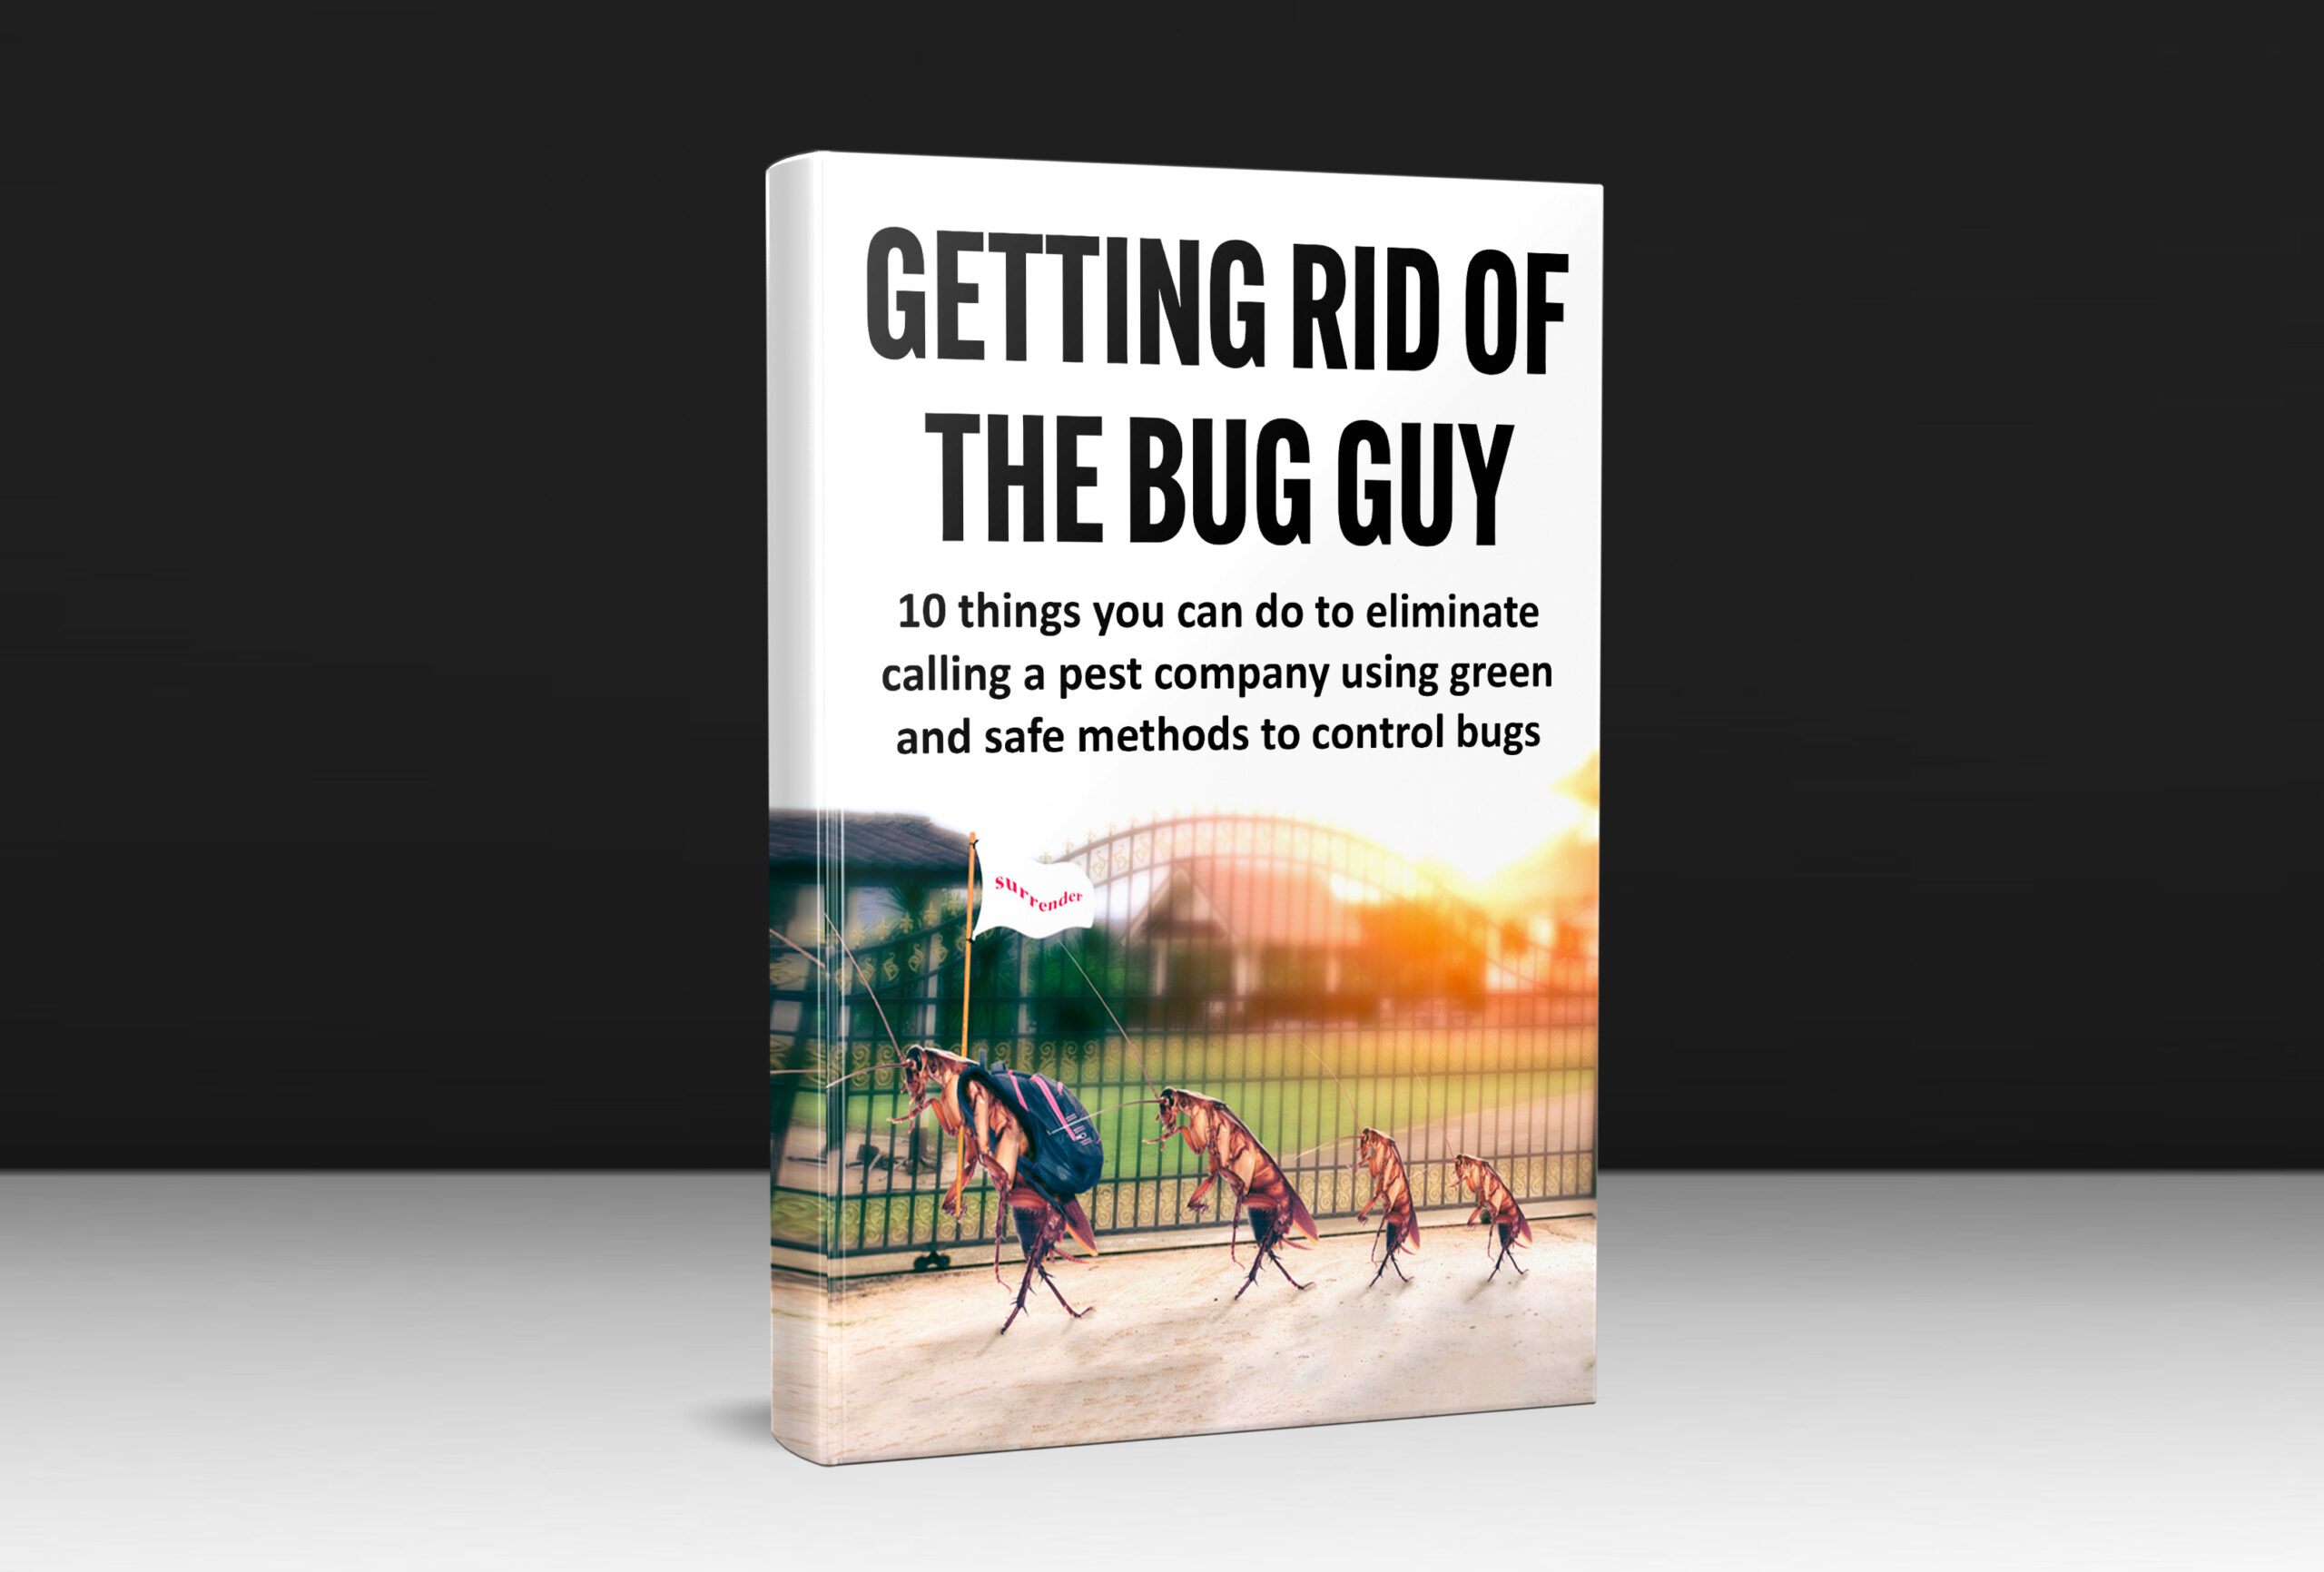 Getting rid of the Bug Guy